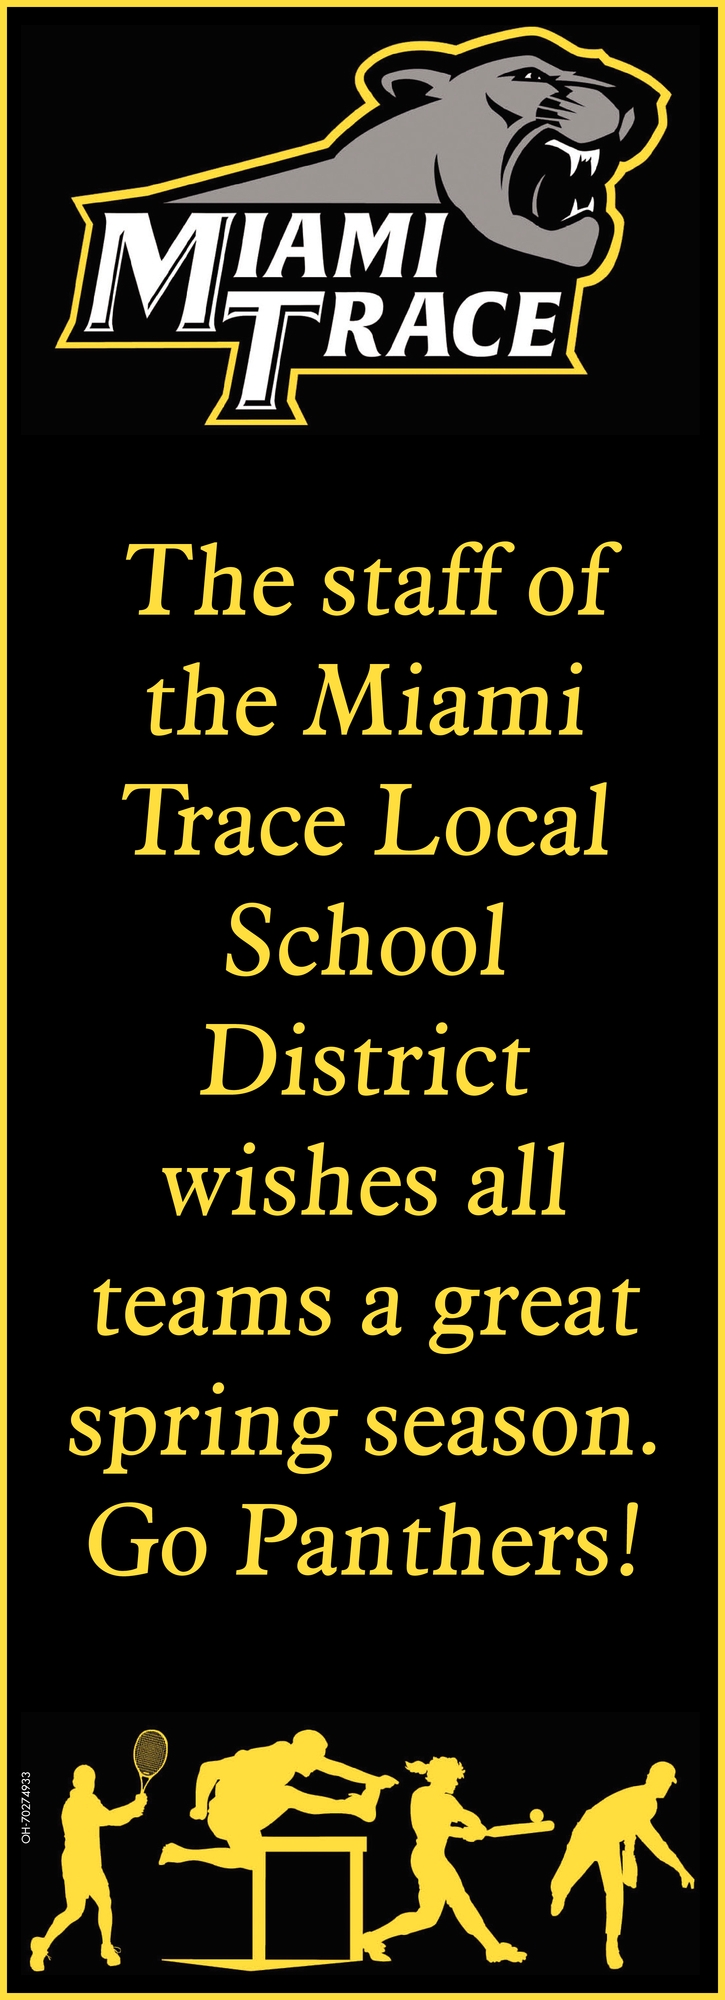 The Staff of the Miami Trace Local School District Wishes All Teams a Great Spring Season